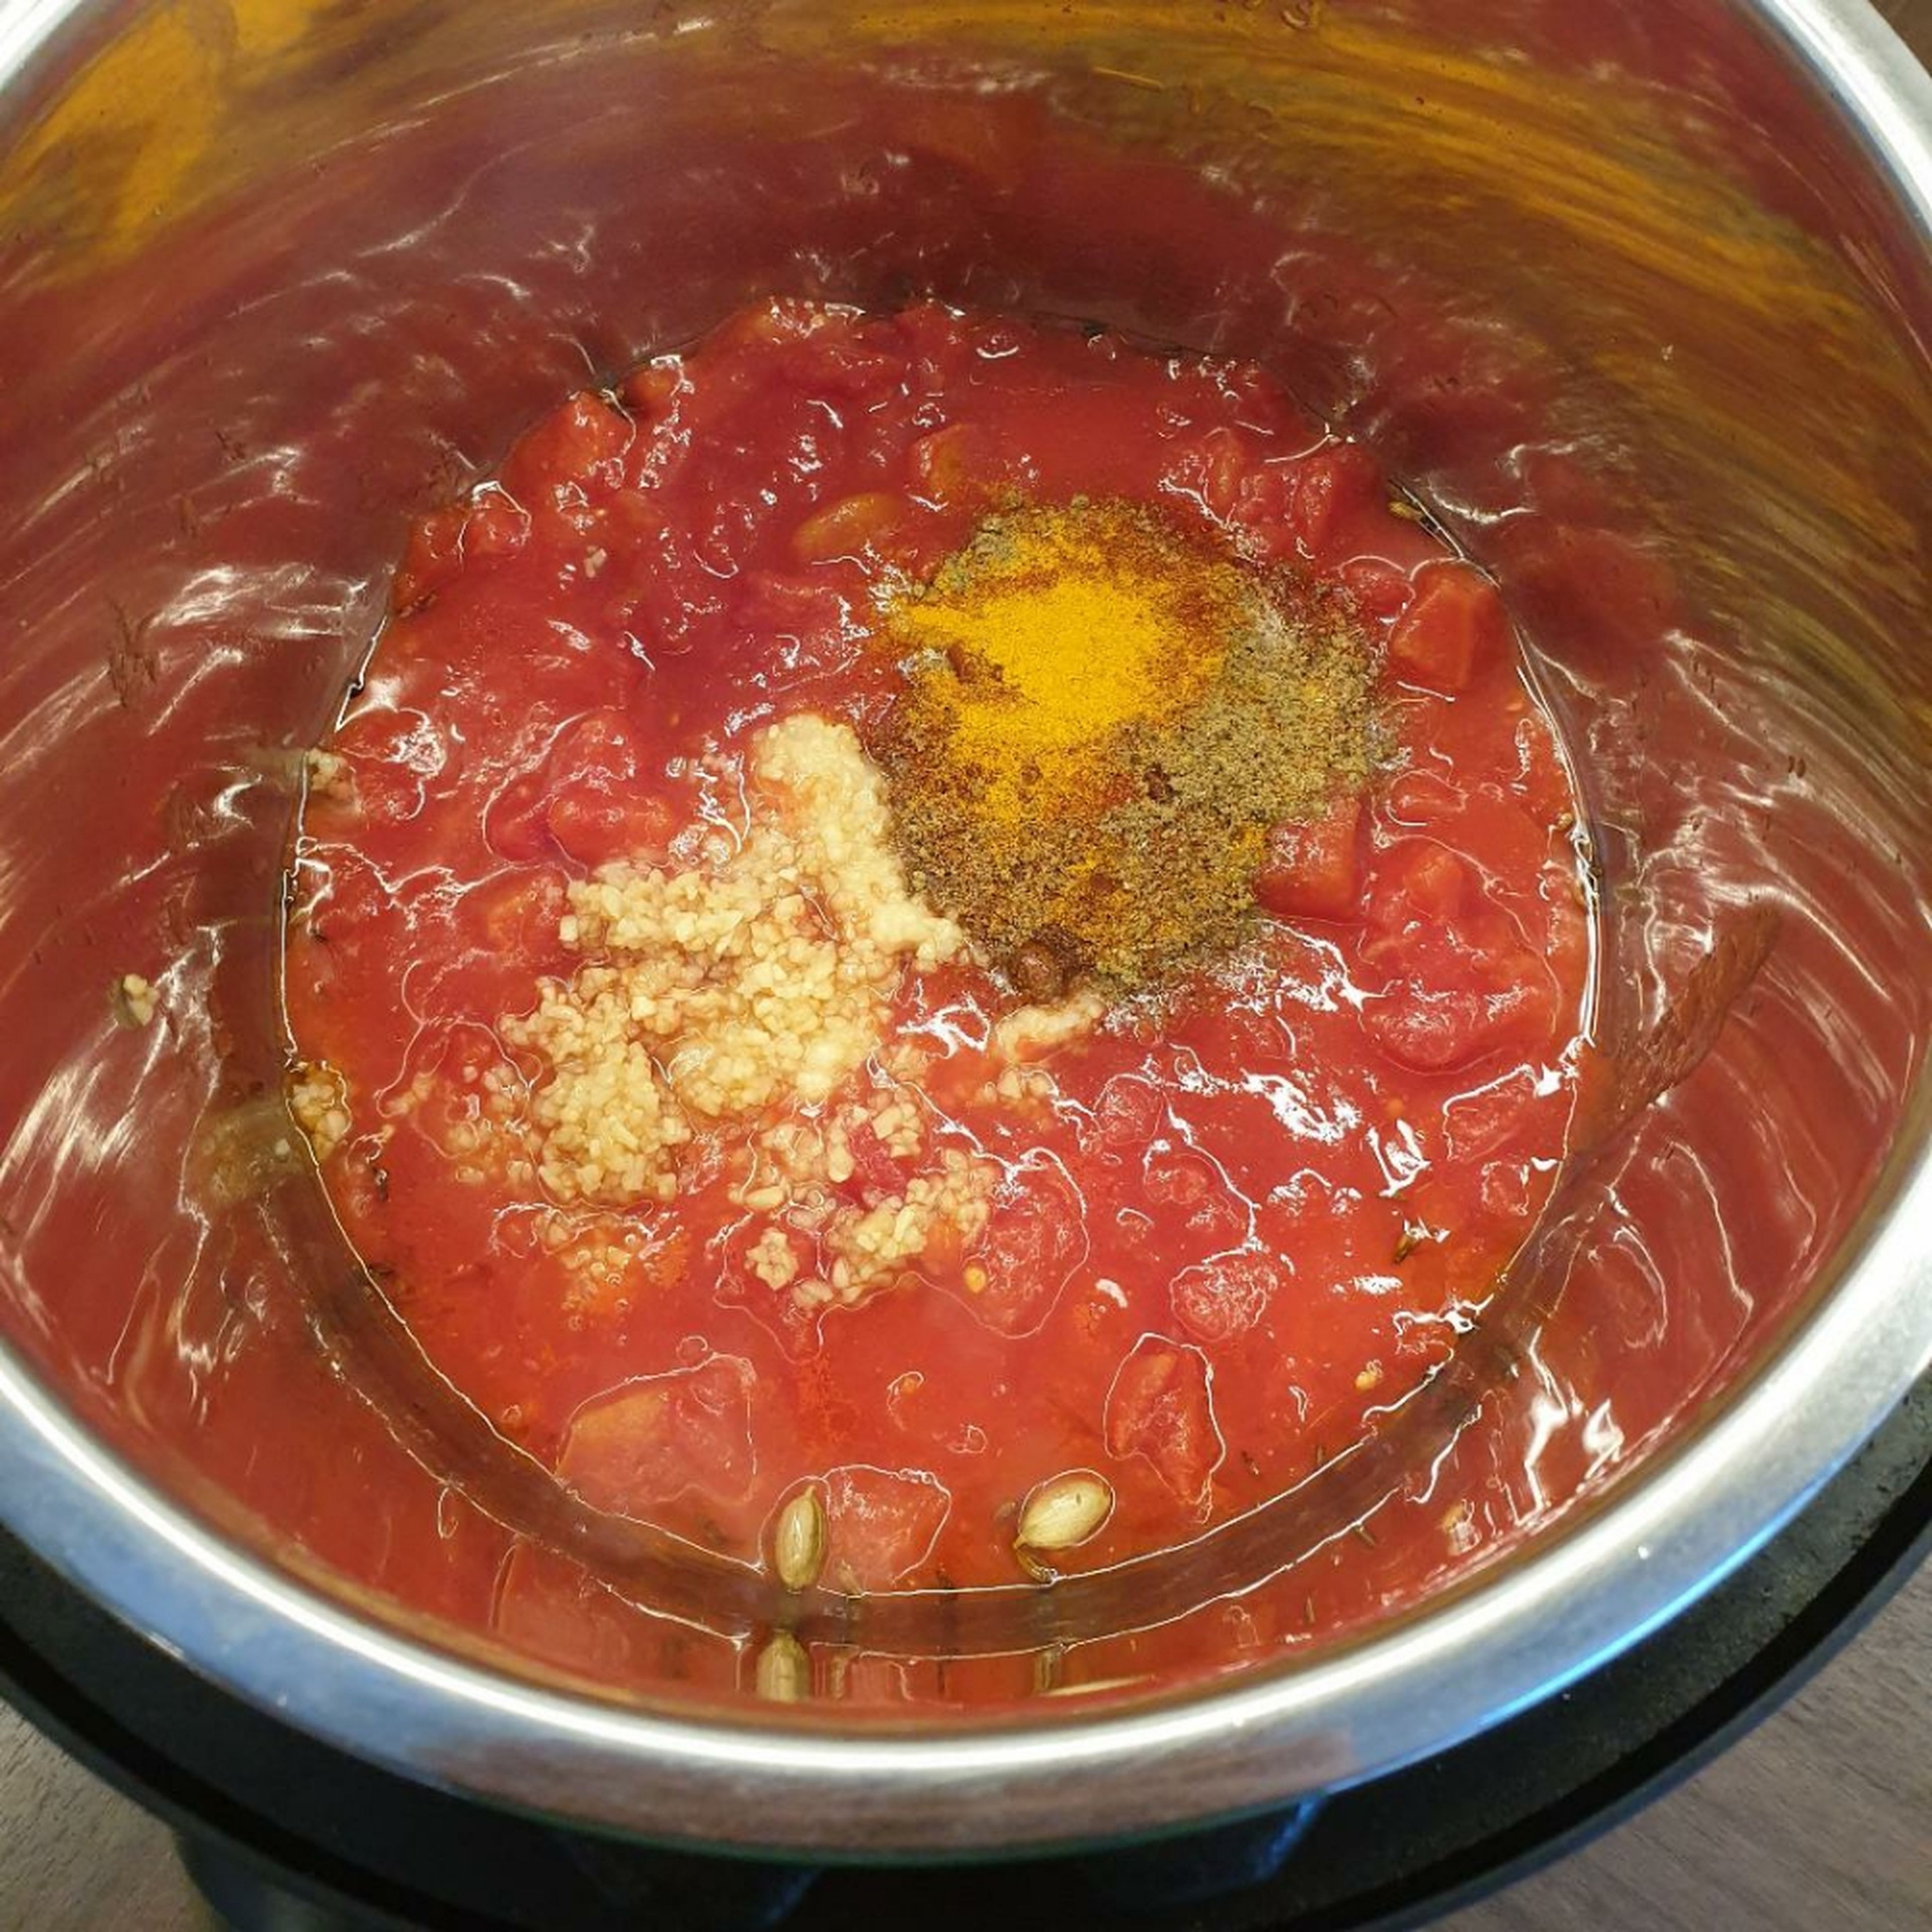 Add the canned tomatoes (including water), garlic, ginger, and dry spices to the Instant Pot and stir.